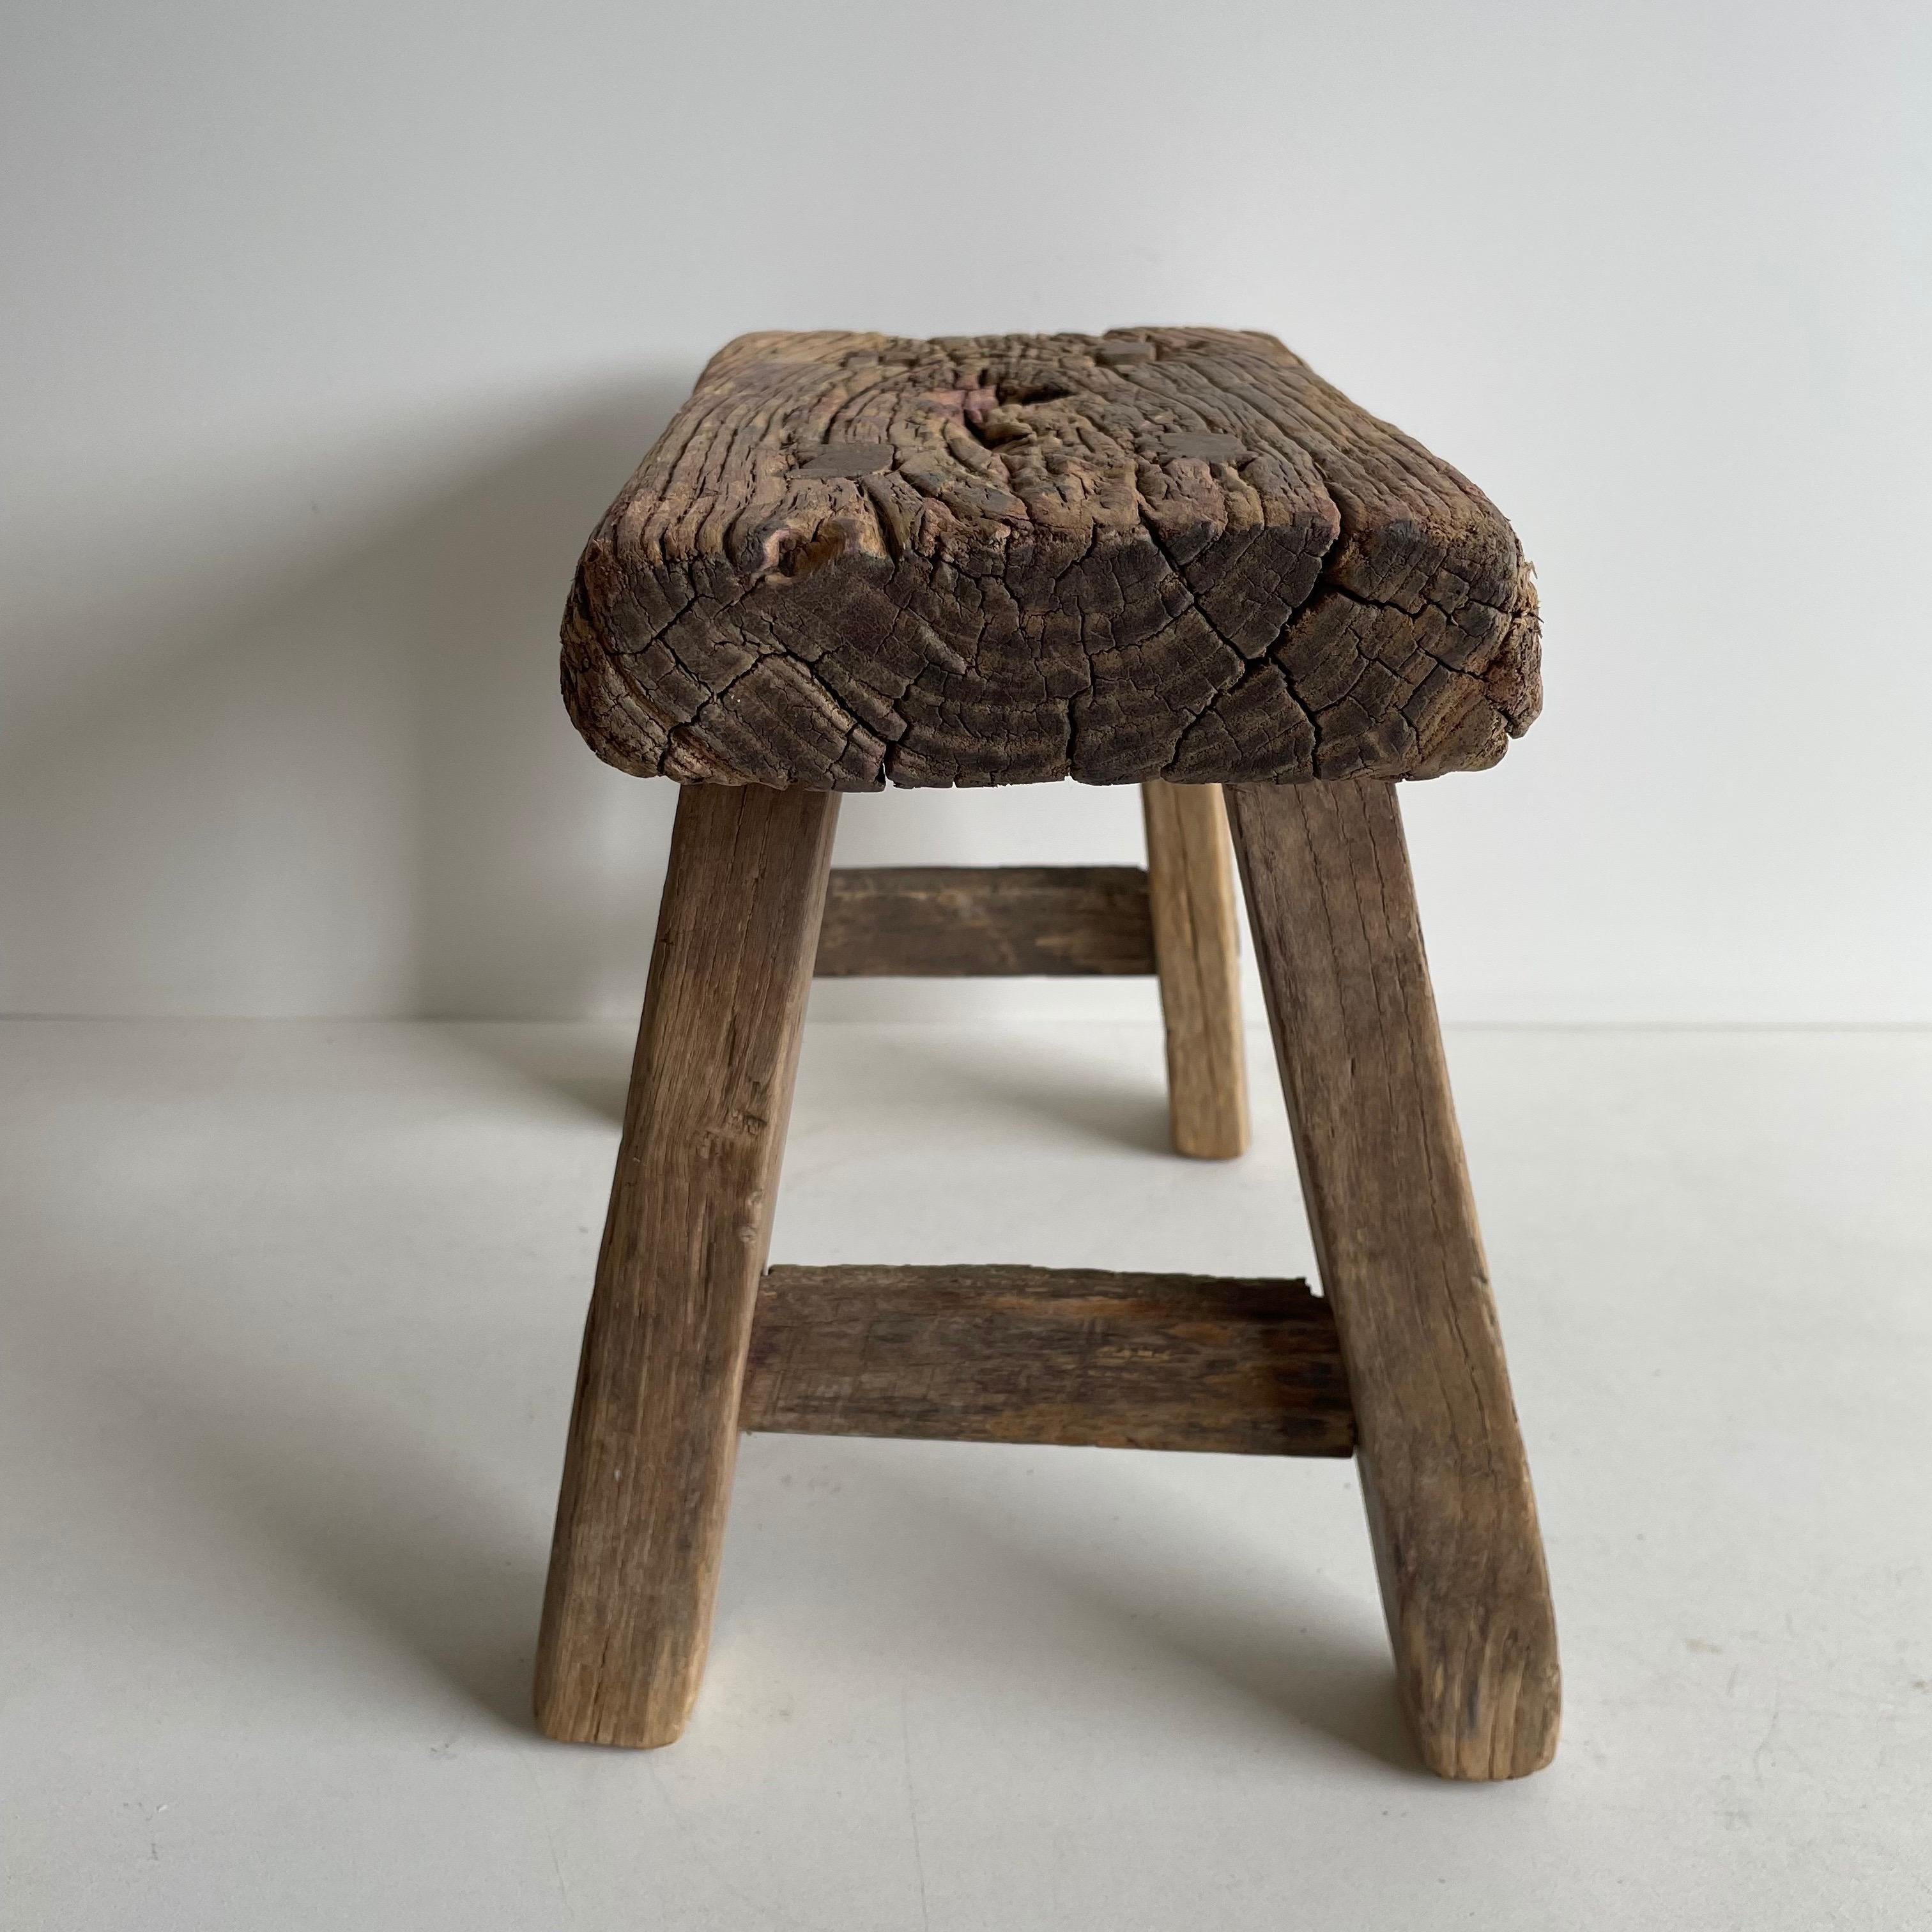 Vintage antique elm wood mini stool These are the real vintage antique elm wood mini stools! Beautiful antique patina, with weathering and age, these are solid and sturdy ready for daily use, use as a table, stool, drink table, they are great for